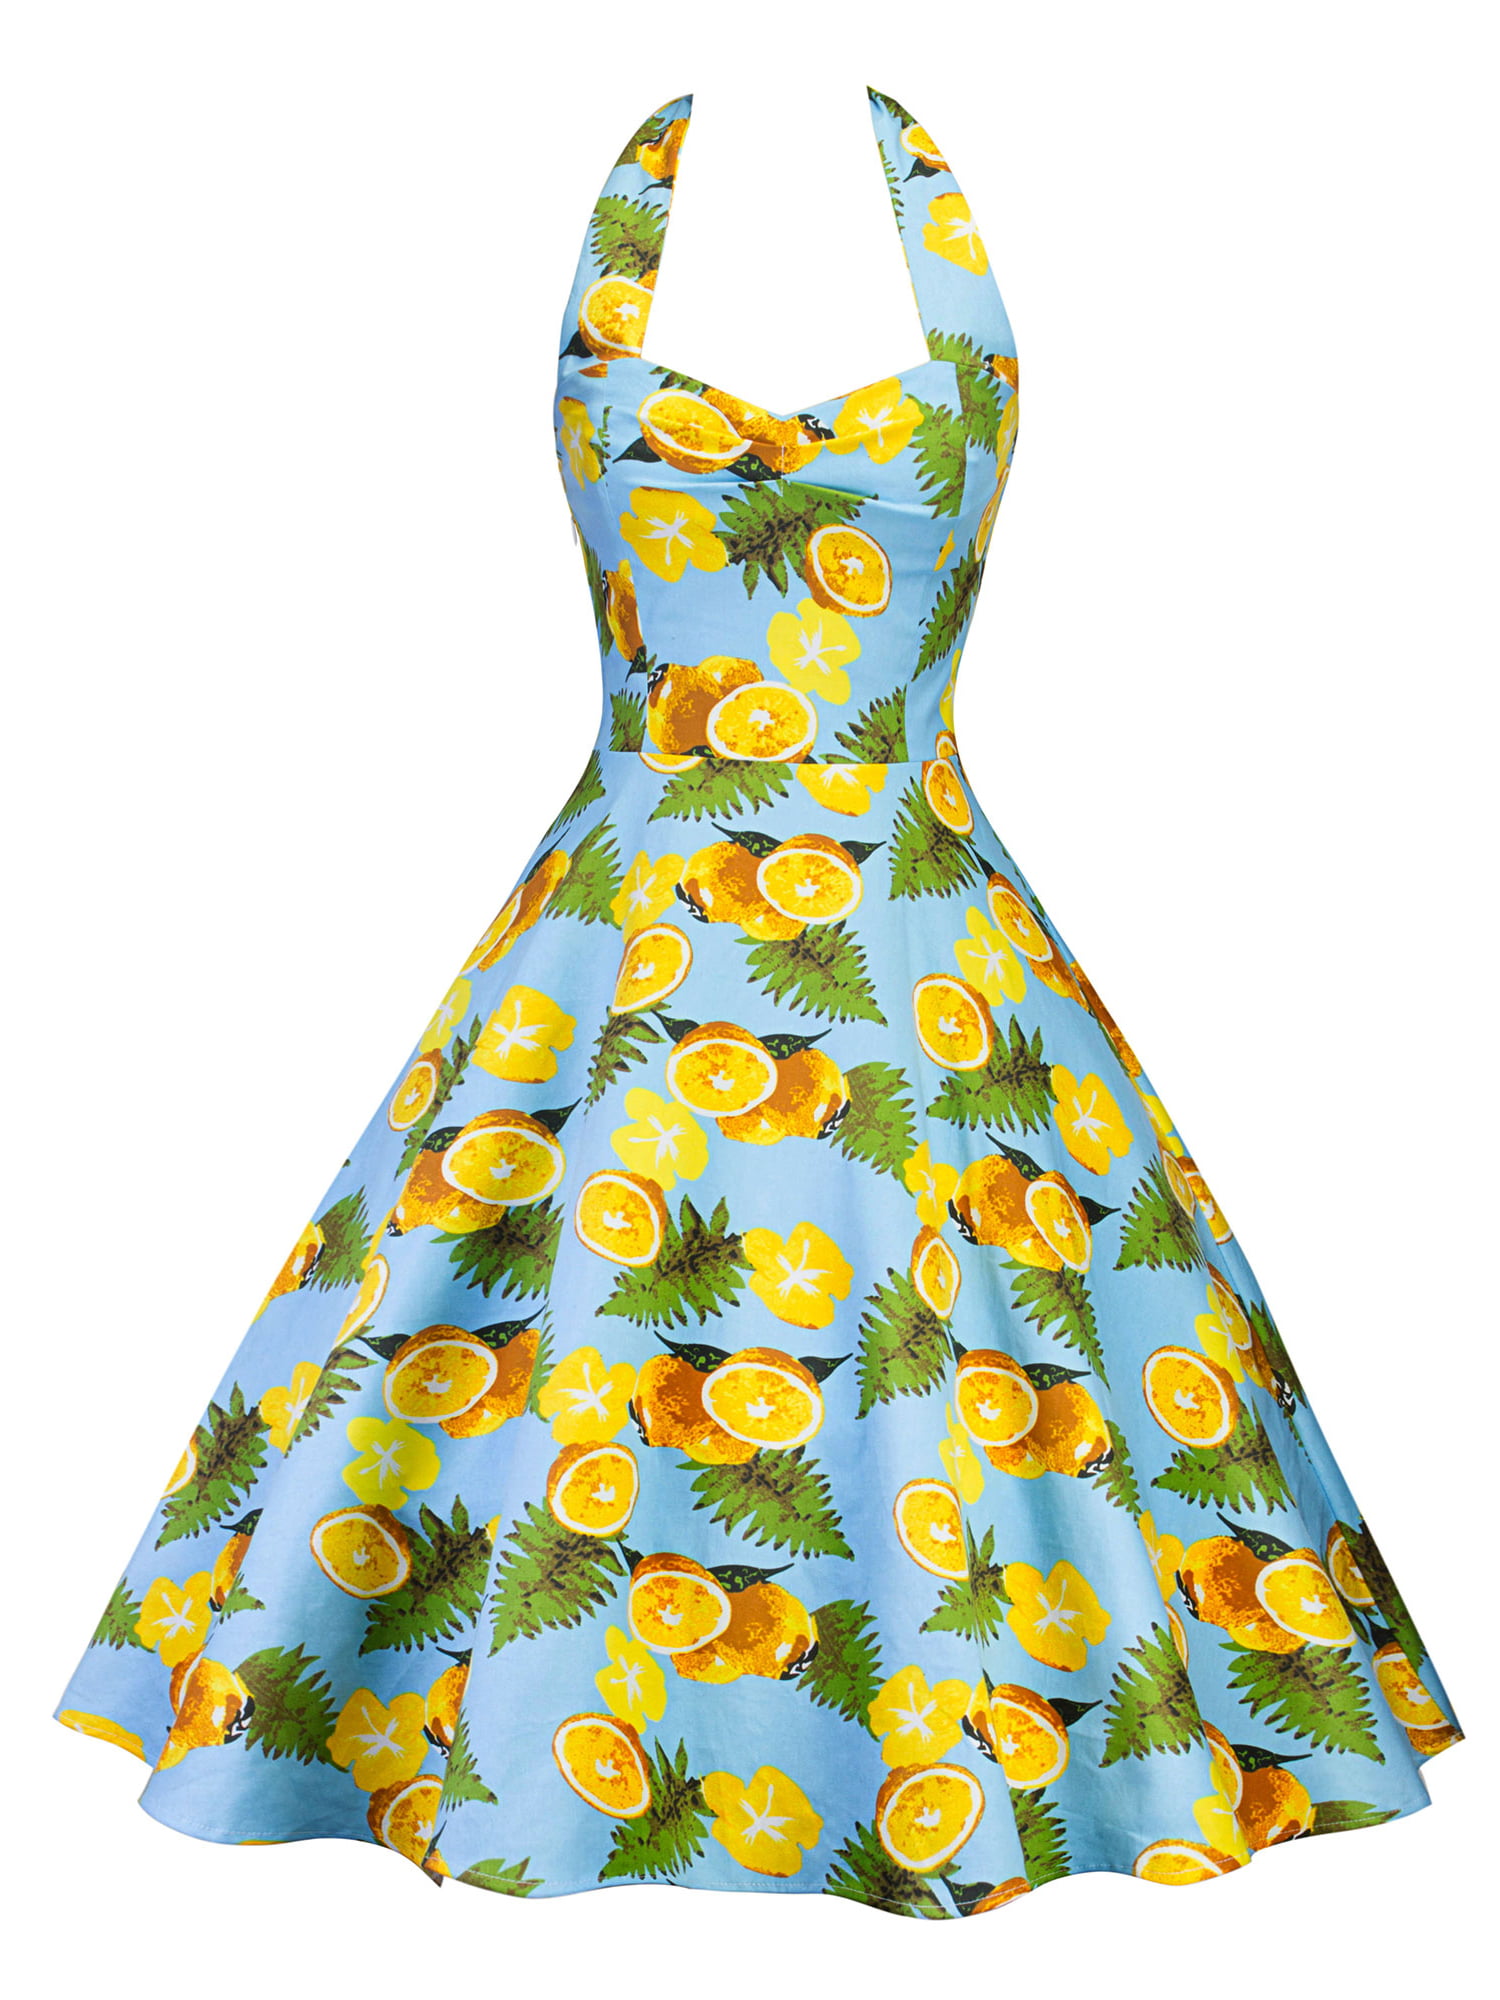 Womens 1950s 60s Vintage Rockabilly Swing Dress Retro Floral Cocktail Partydress 